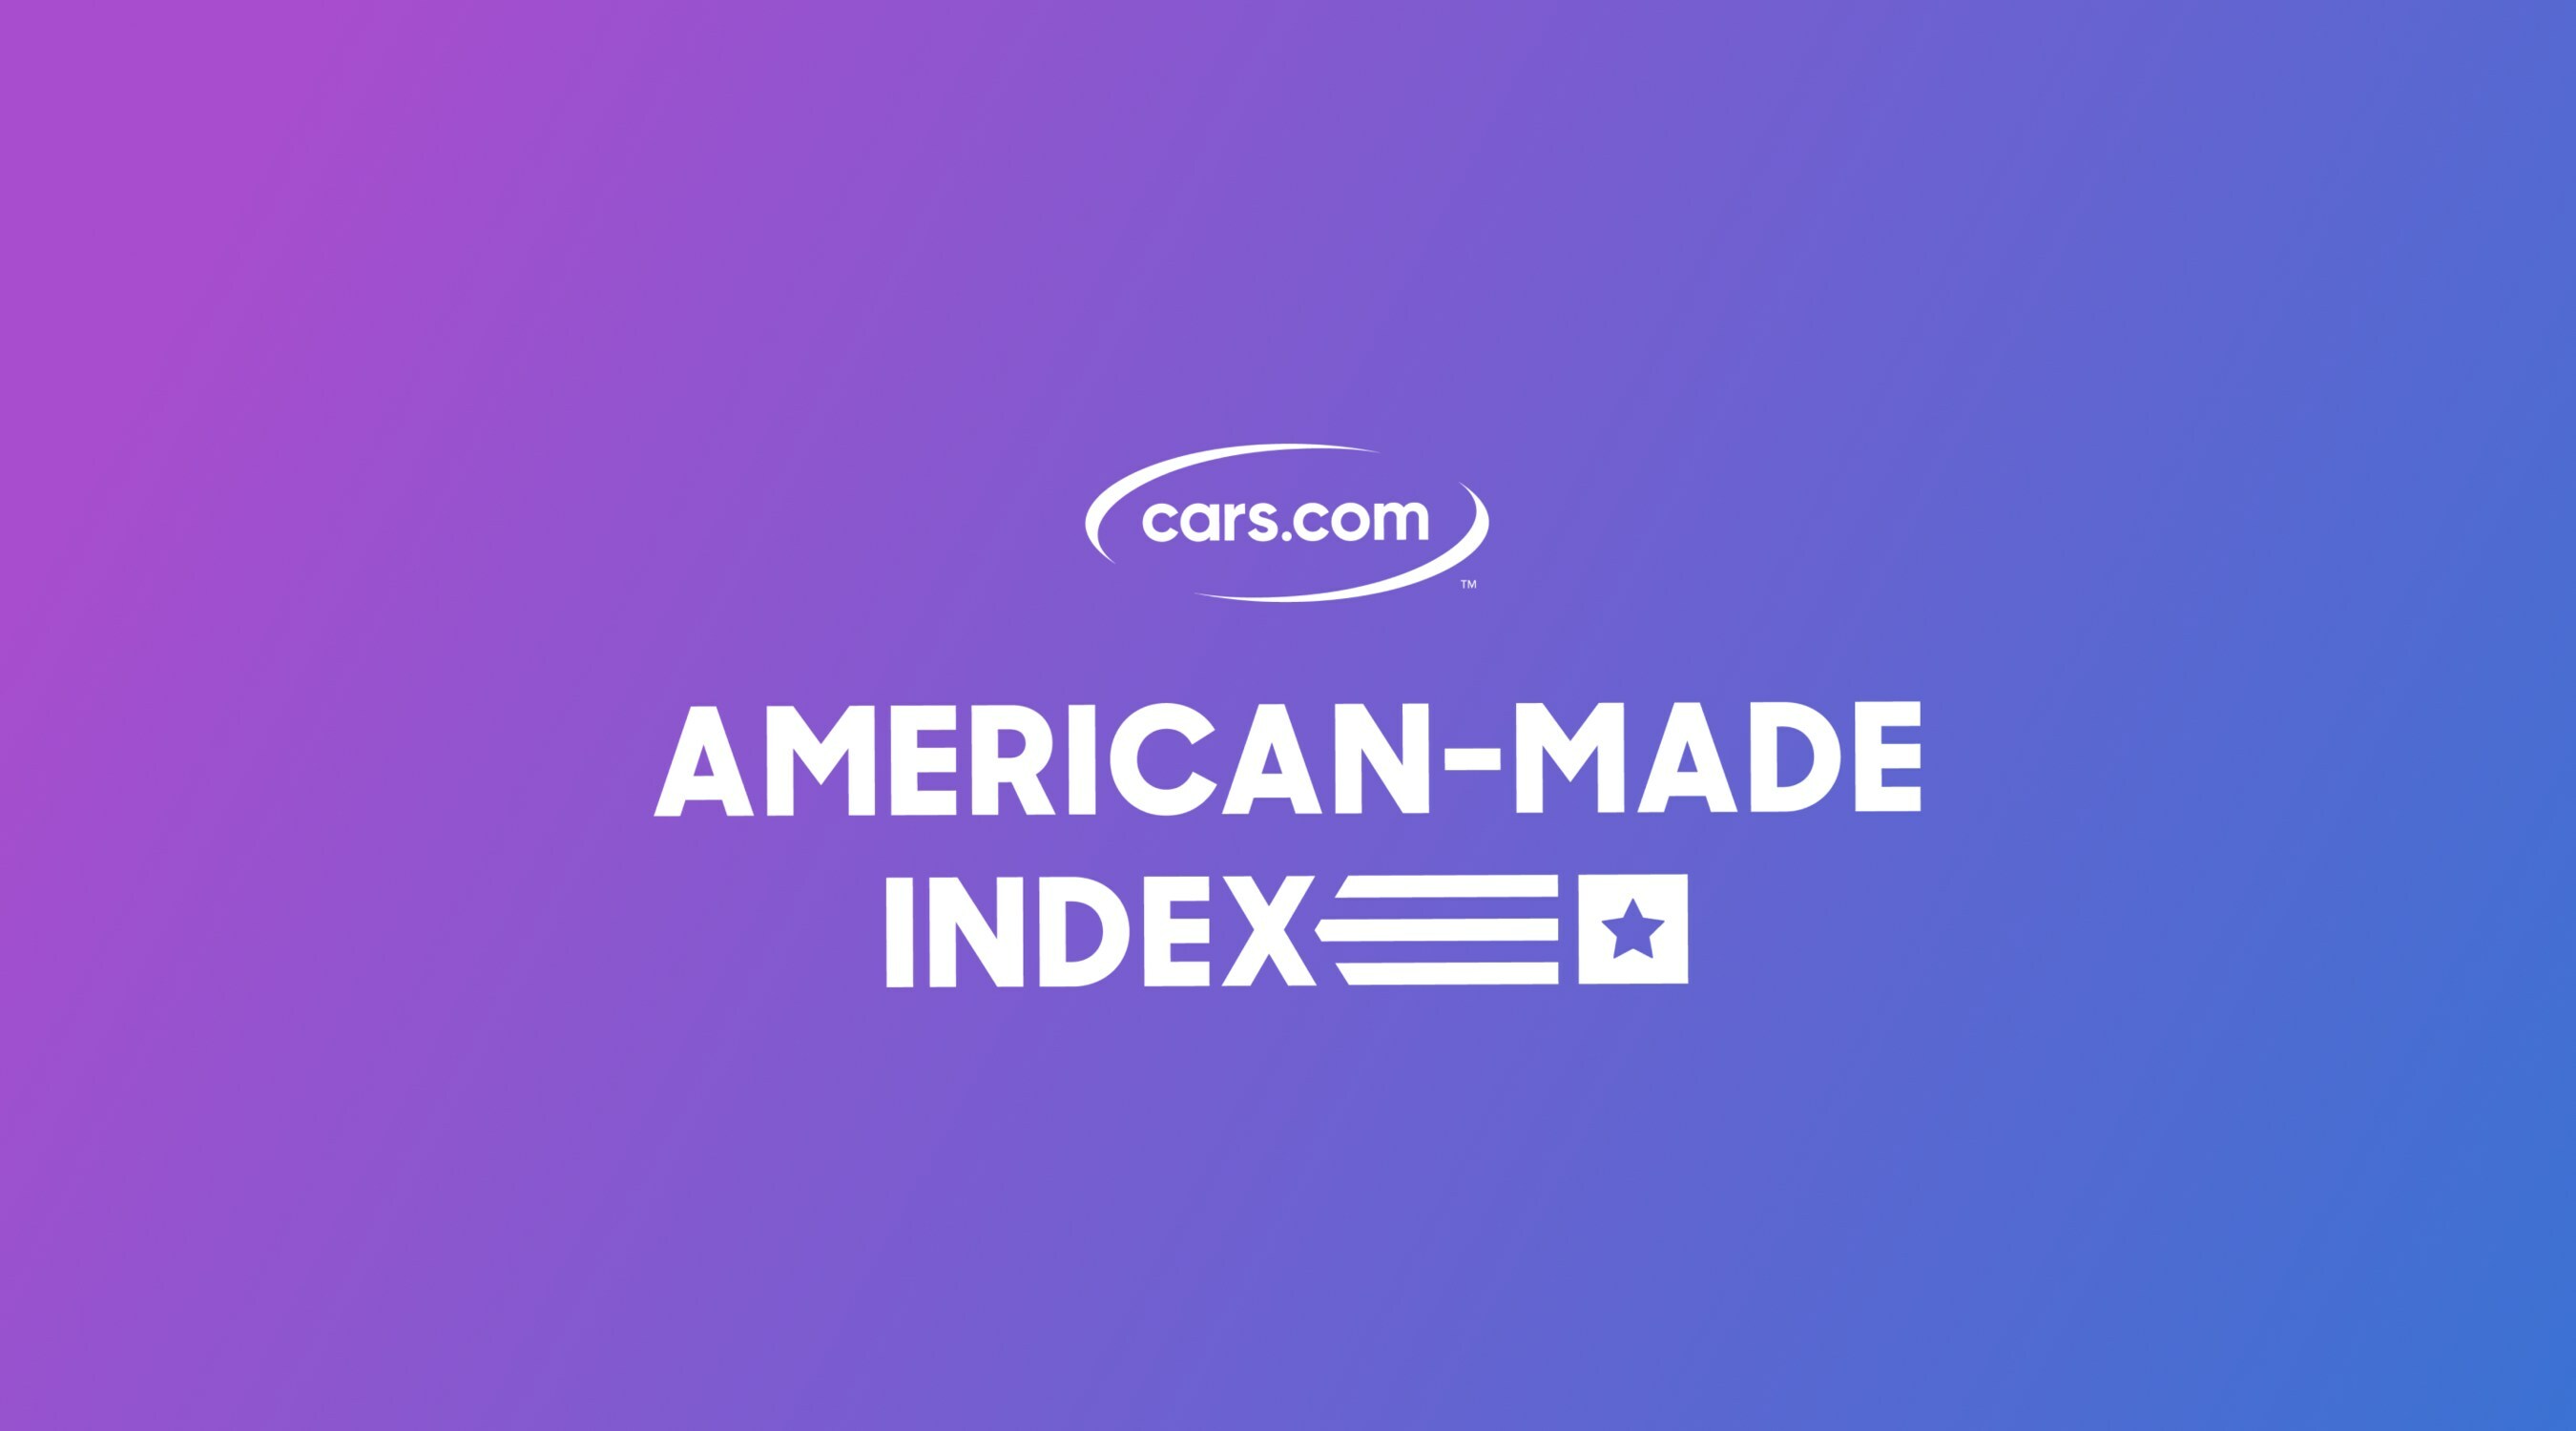 AMERICANMADE INDEX SEES 260 JUMP IN ELECTRIFIED VEHICLES